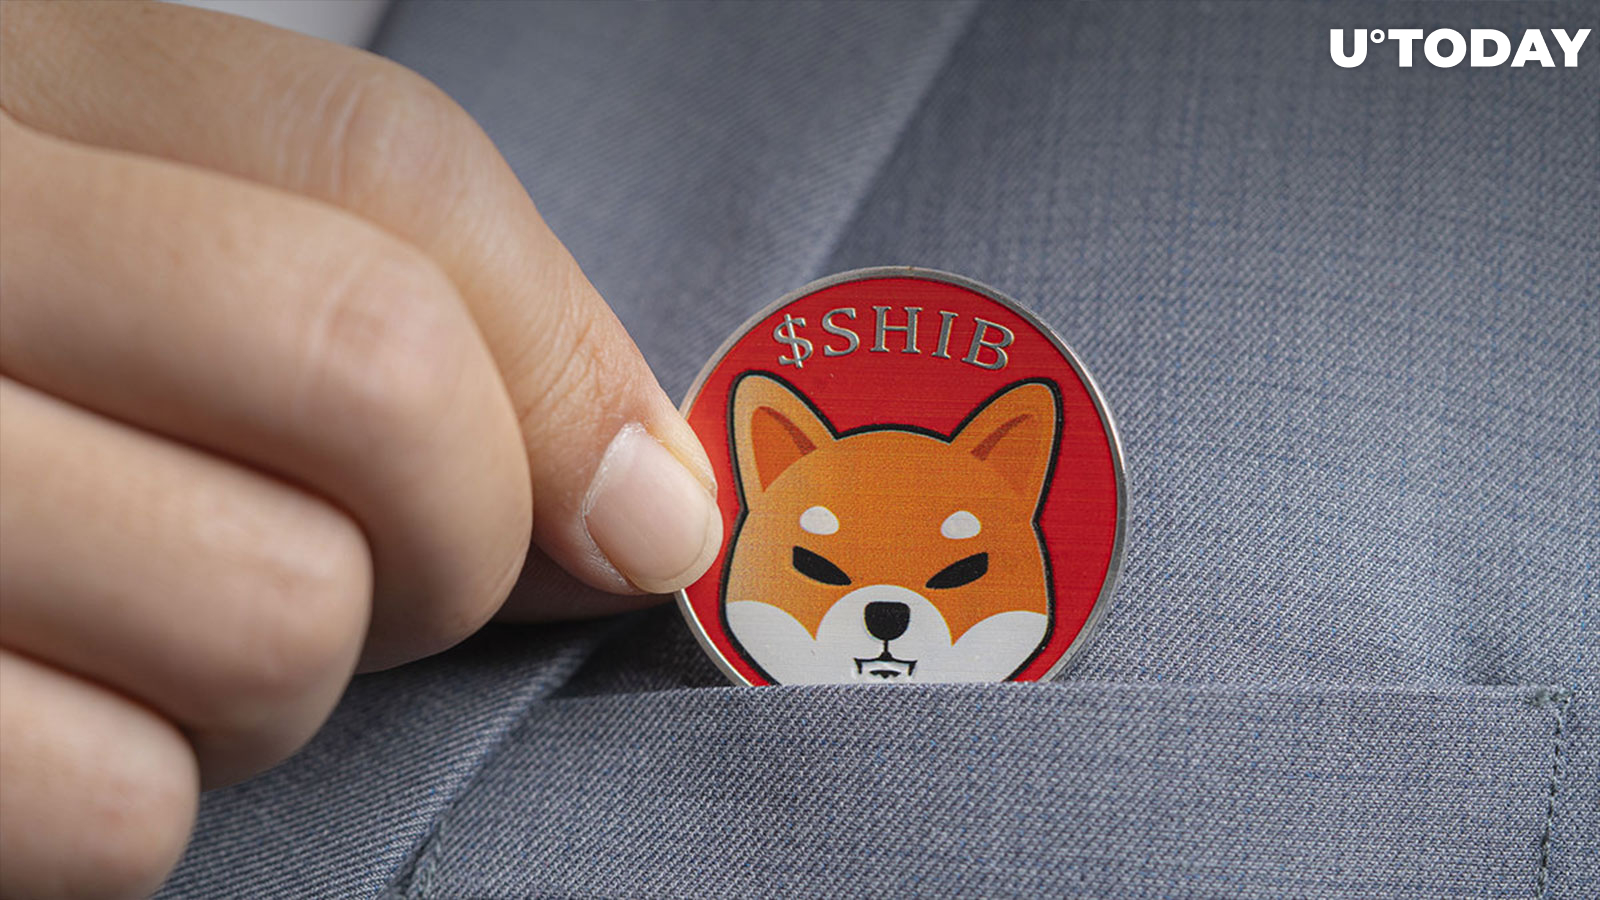 Shiba Inu Kickstarts “Special Countdown”. What Could It Mean? 